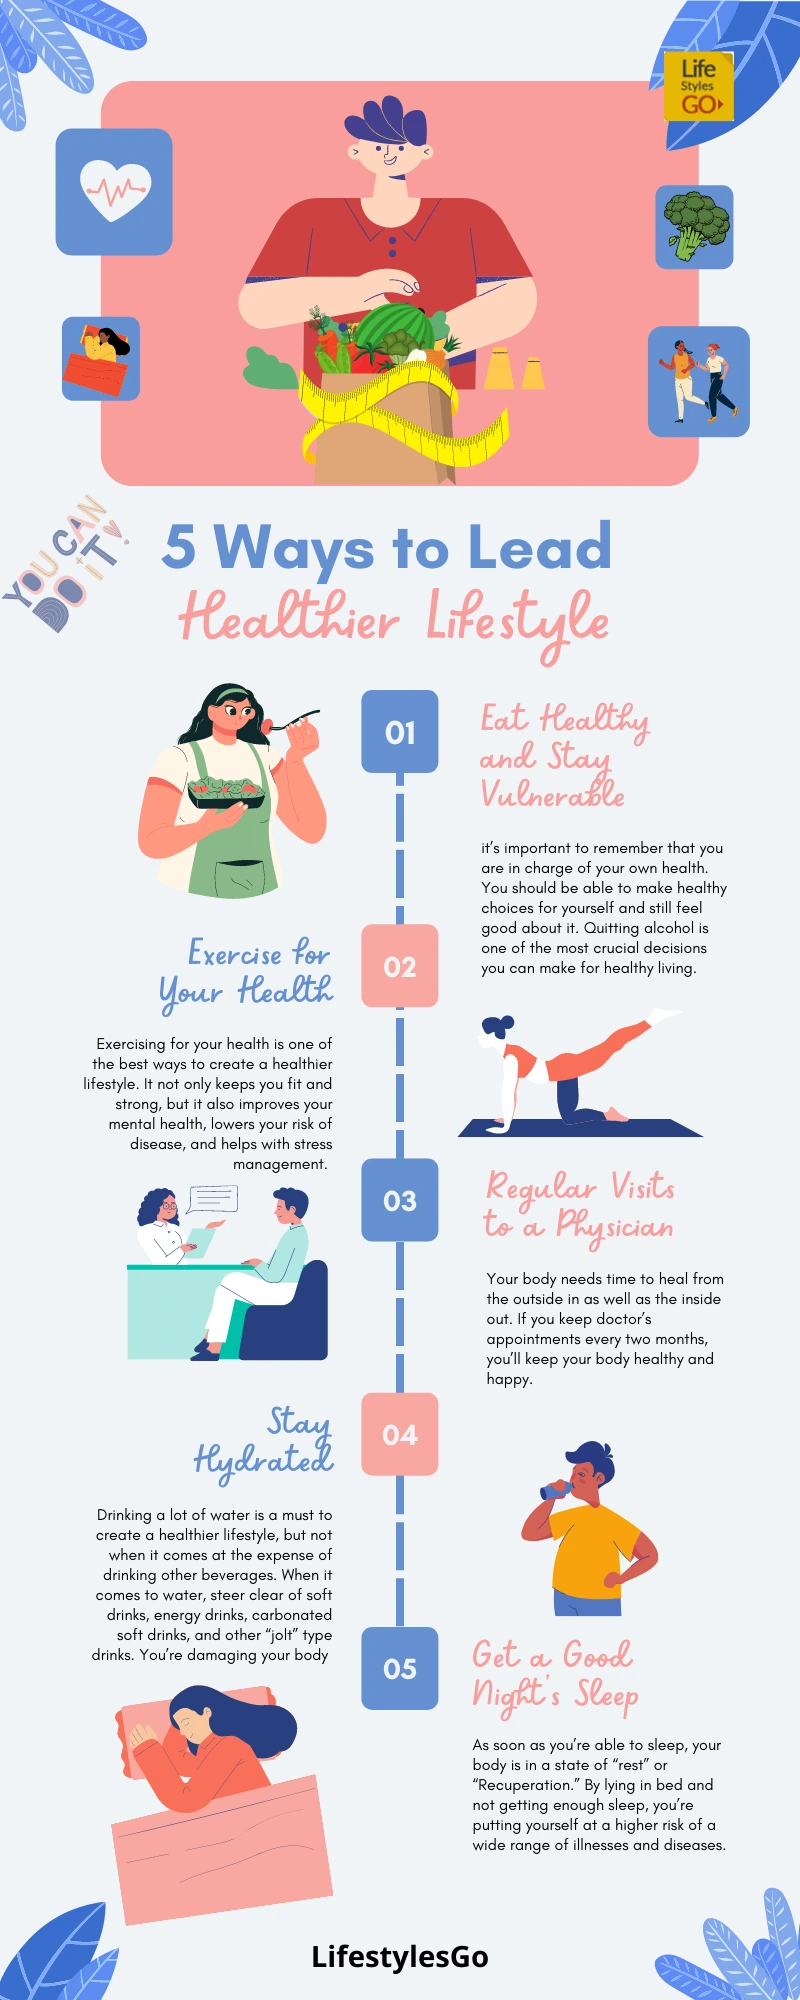 How to Create a Healthier Lifestyle in 5 Easy Steps Infographic